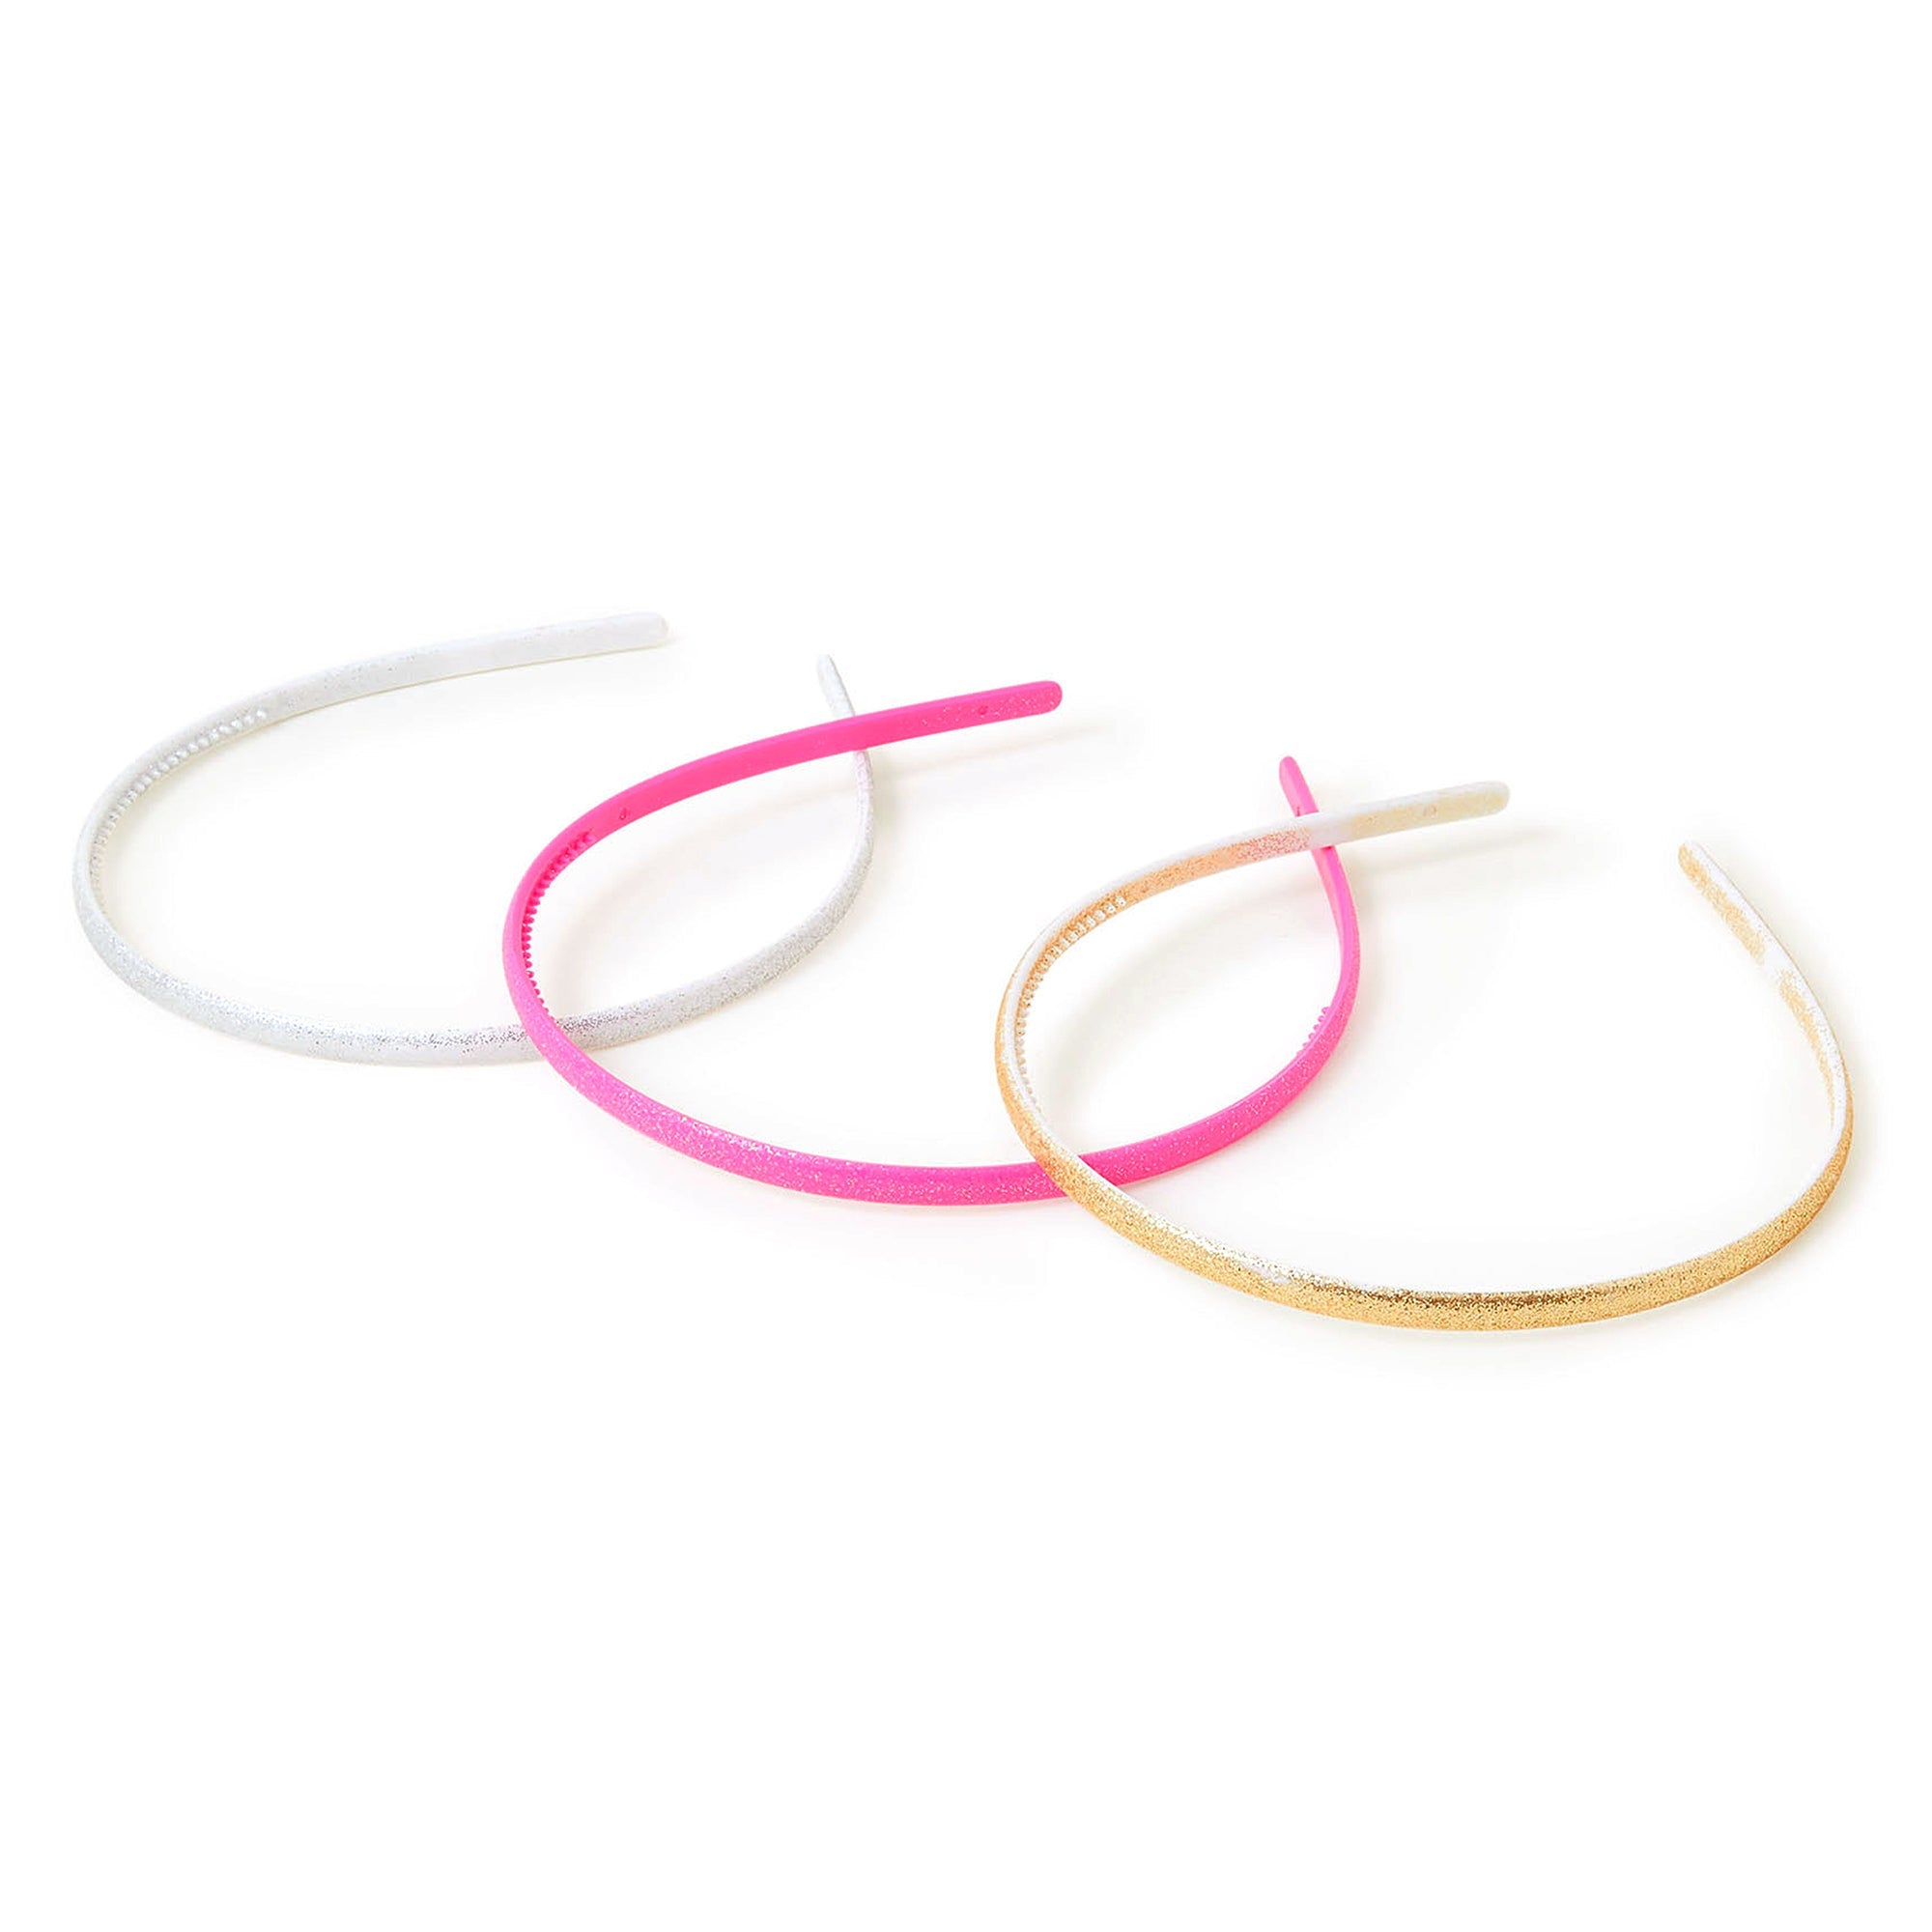 Accessorize London Girl's Set Of 3 Rec Skinny Alice Hair Bands